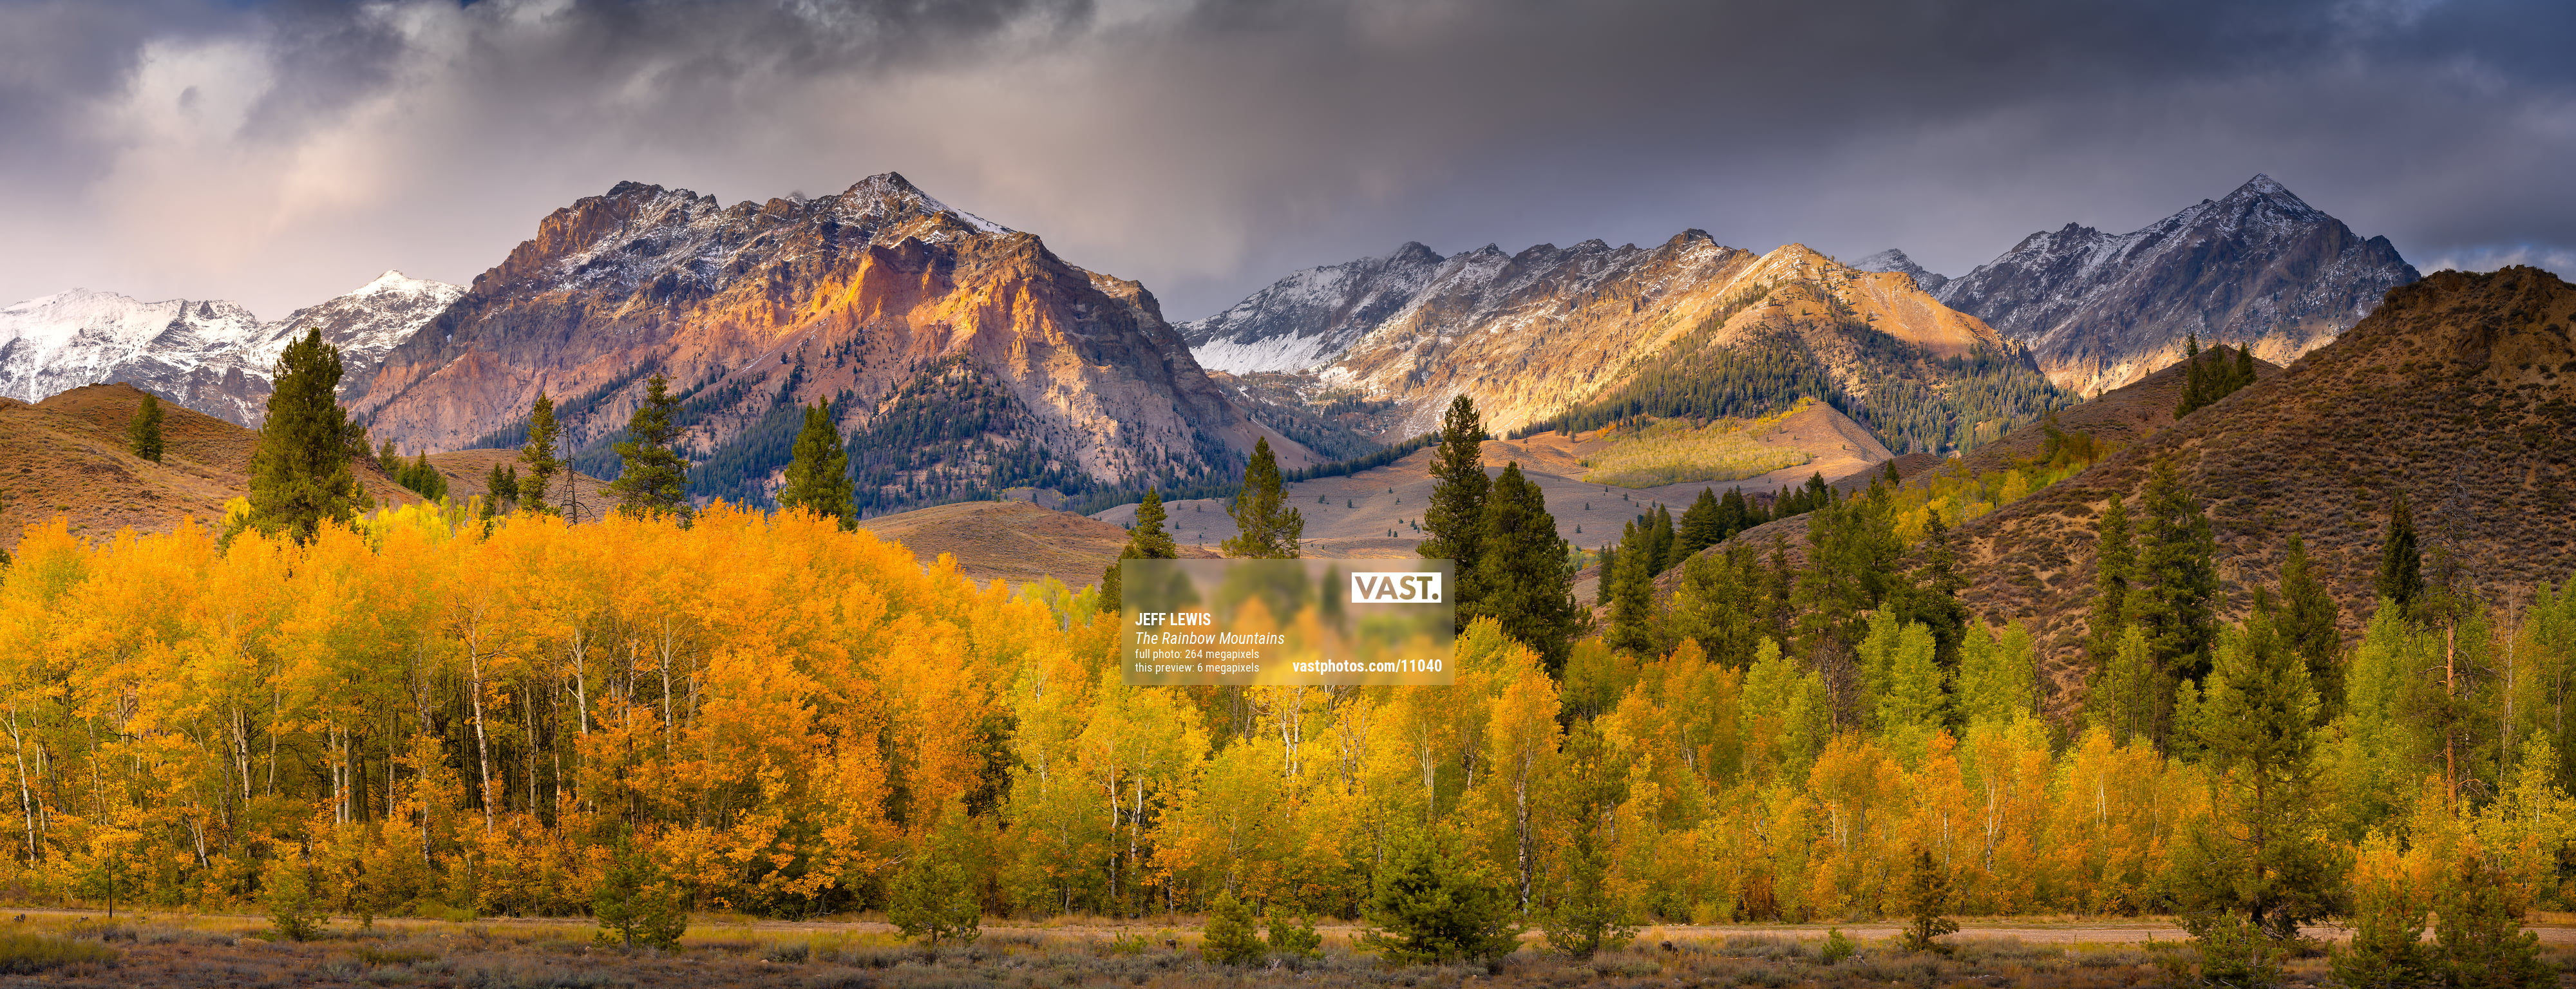 Large Frame Gallery Wall Set of Colorado Travel Photography, Gallery Wall  Framed Set in Fall Colors, US Travel Photography Set for Gallery 